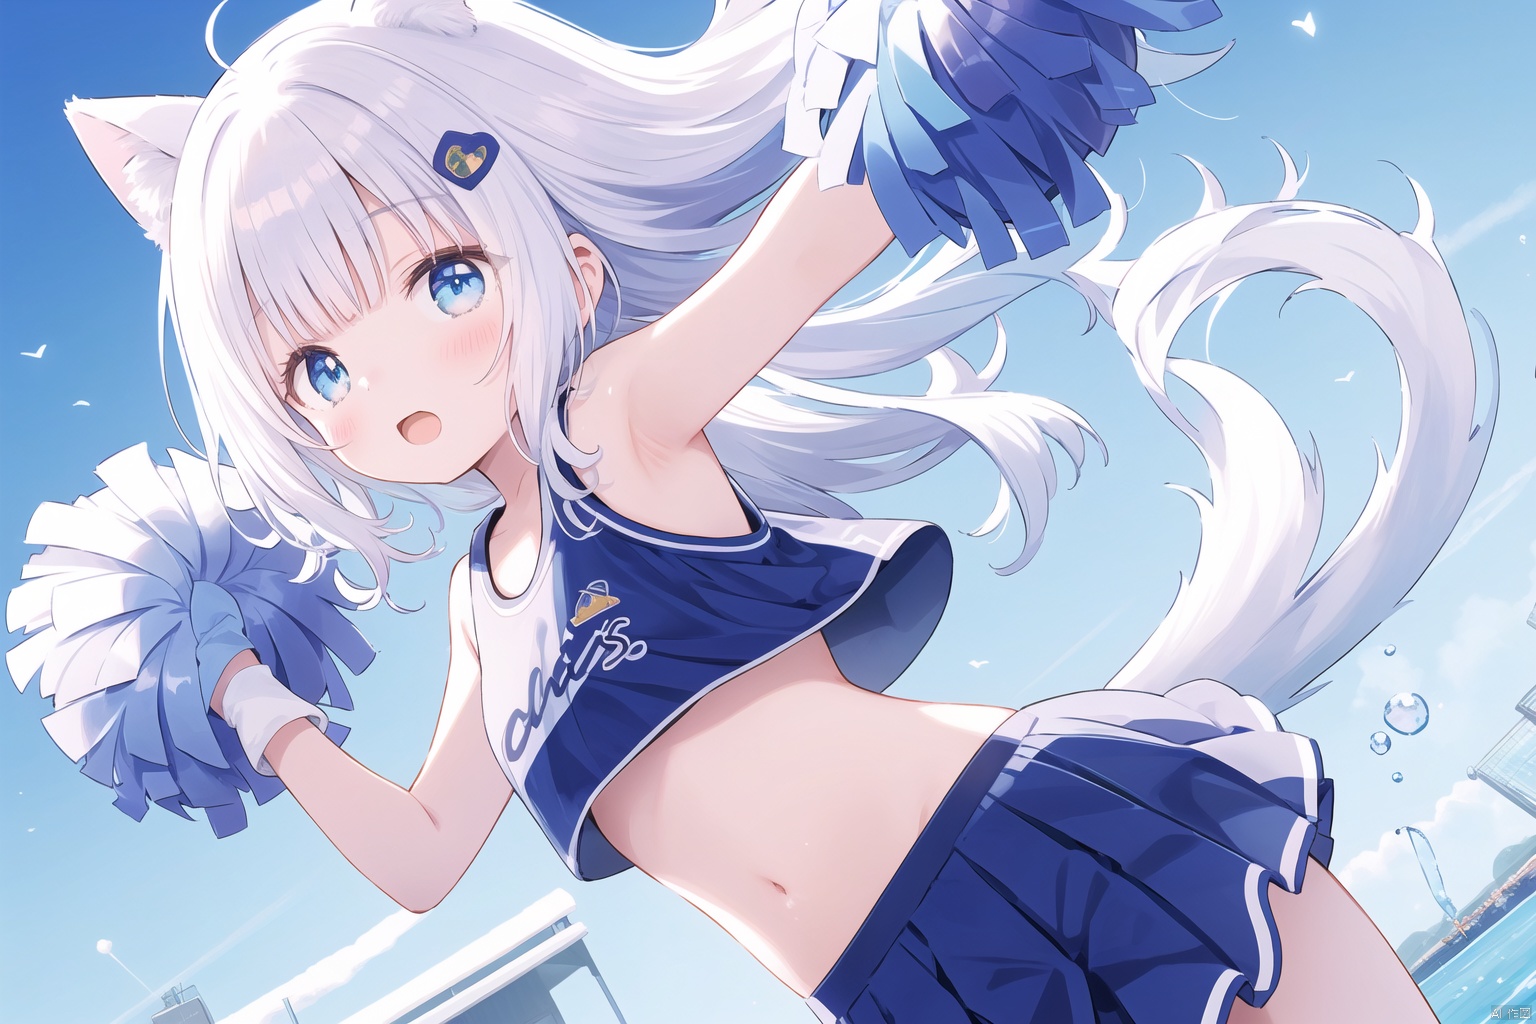 catgirl, white hair, blue eyes, cheerleader outfit, pom-poms, gymnasium background